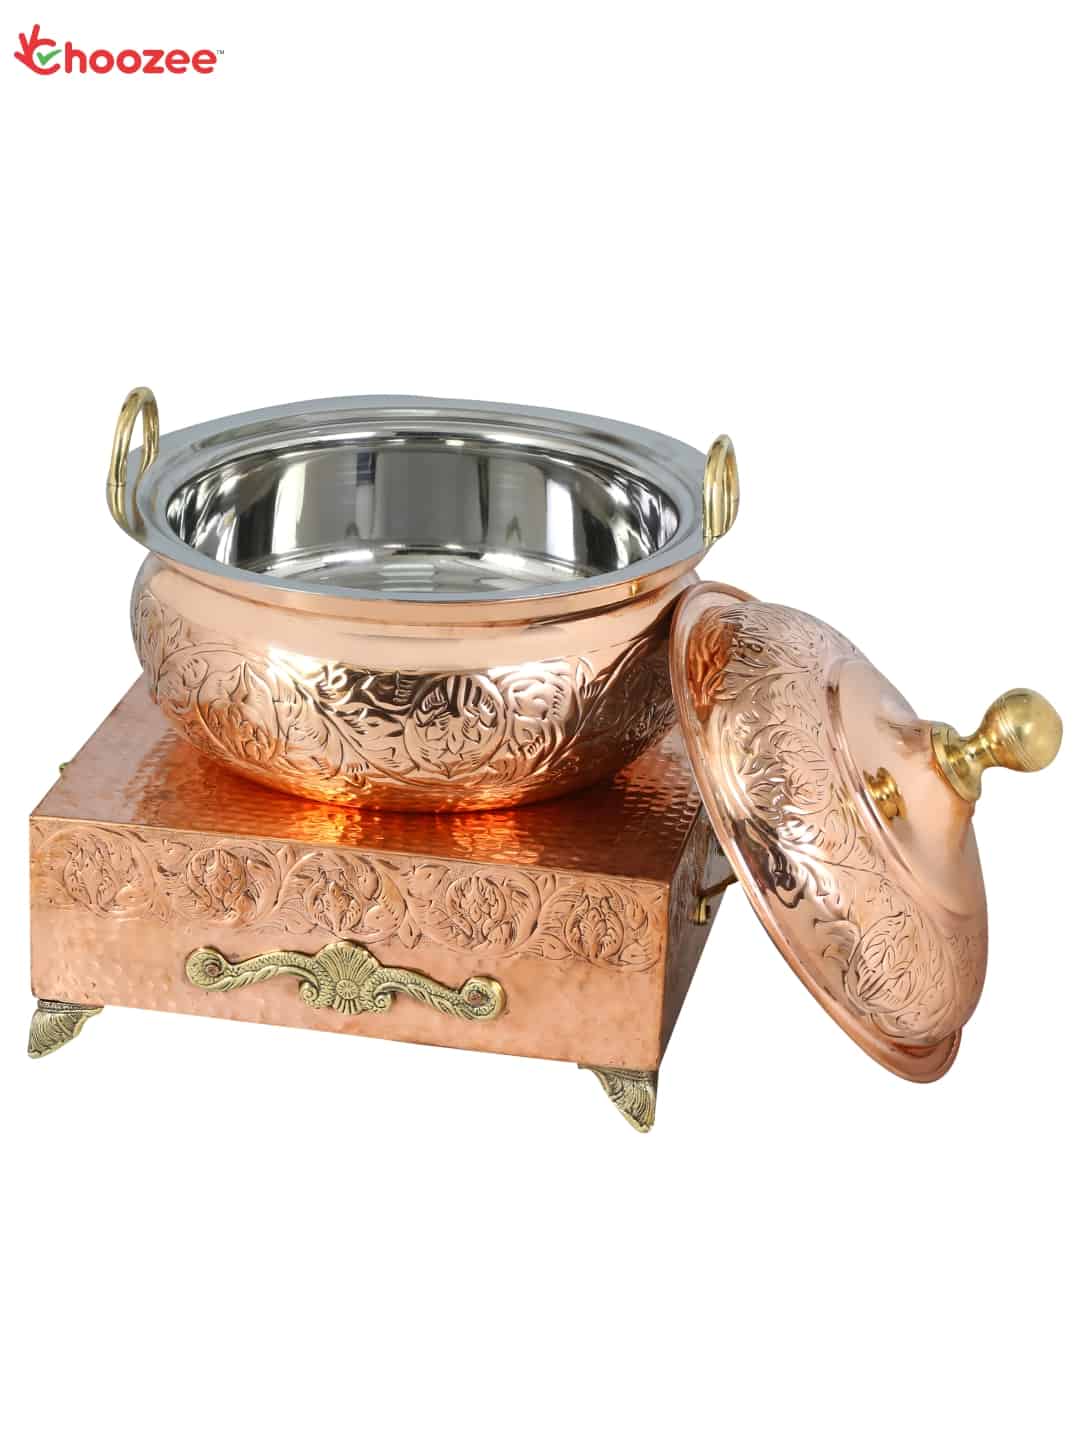 Copper Royal Chafing Dish 8 Ltr